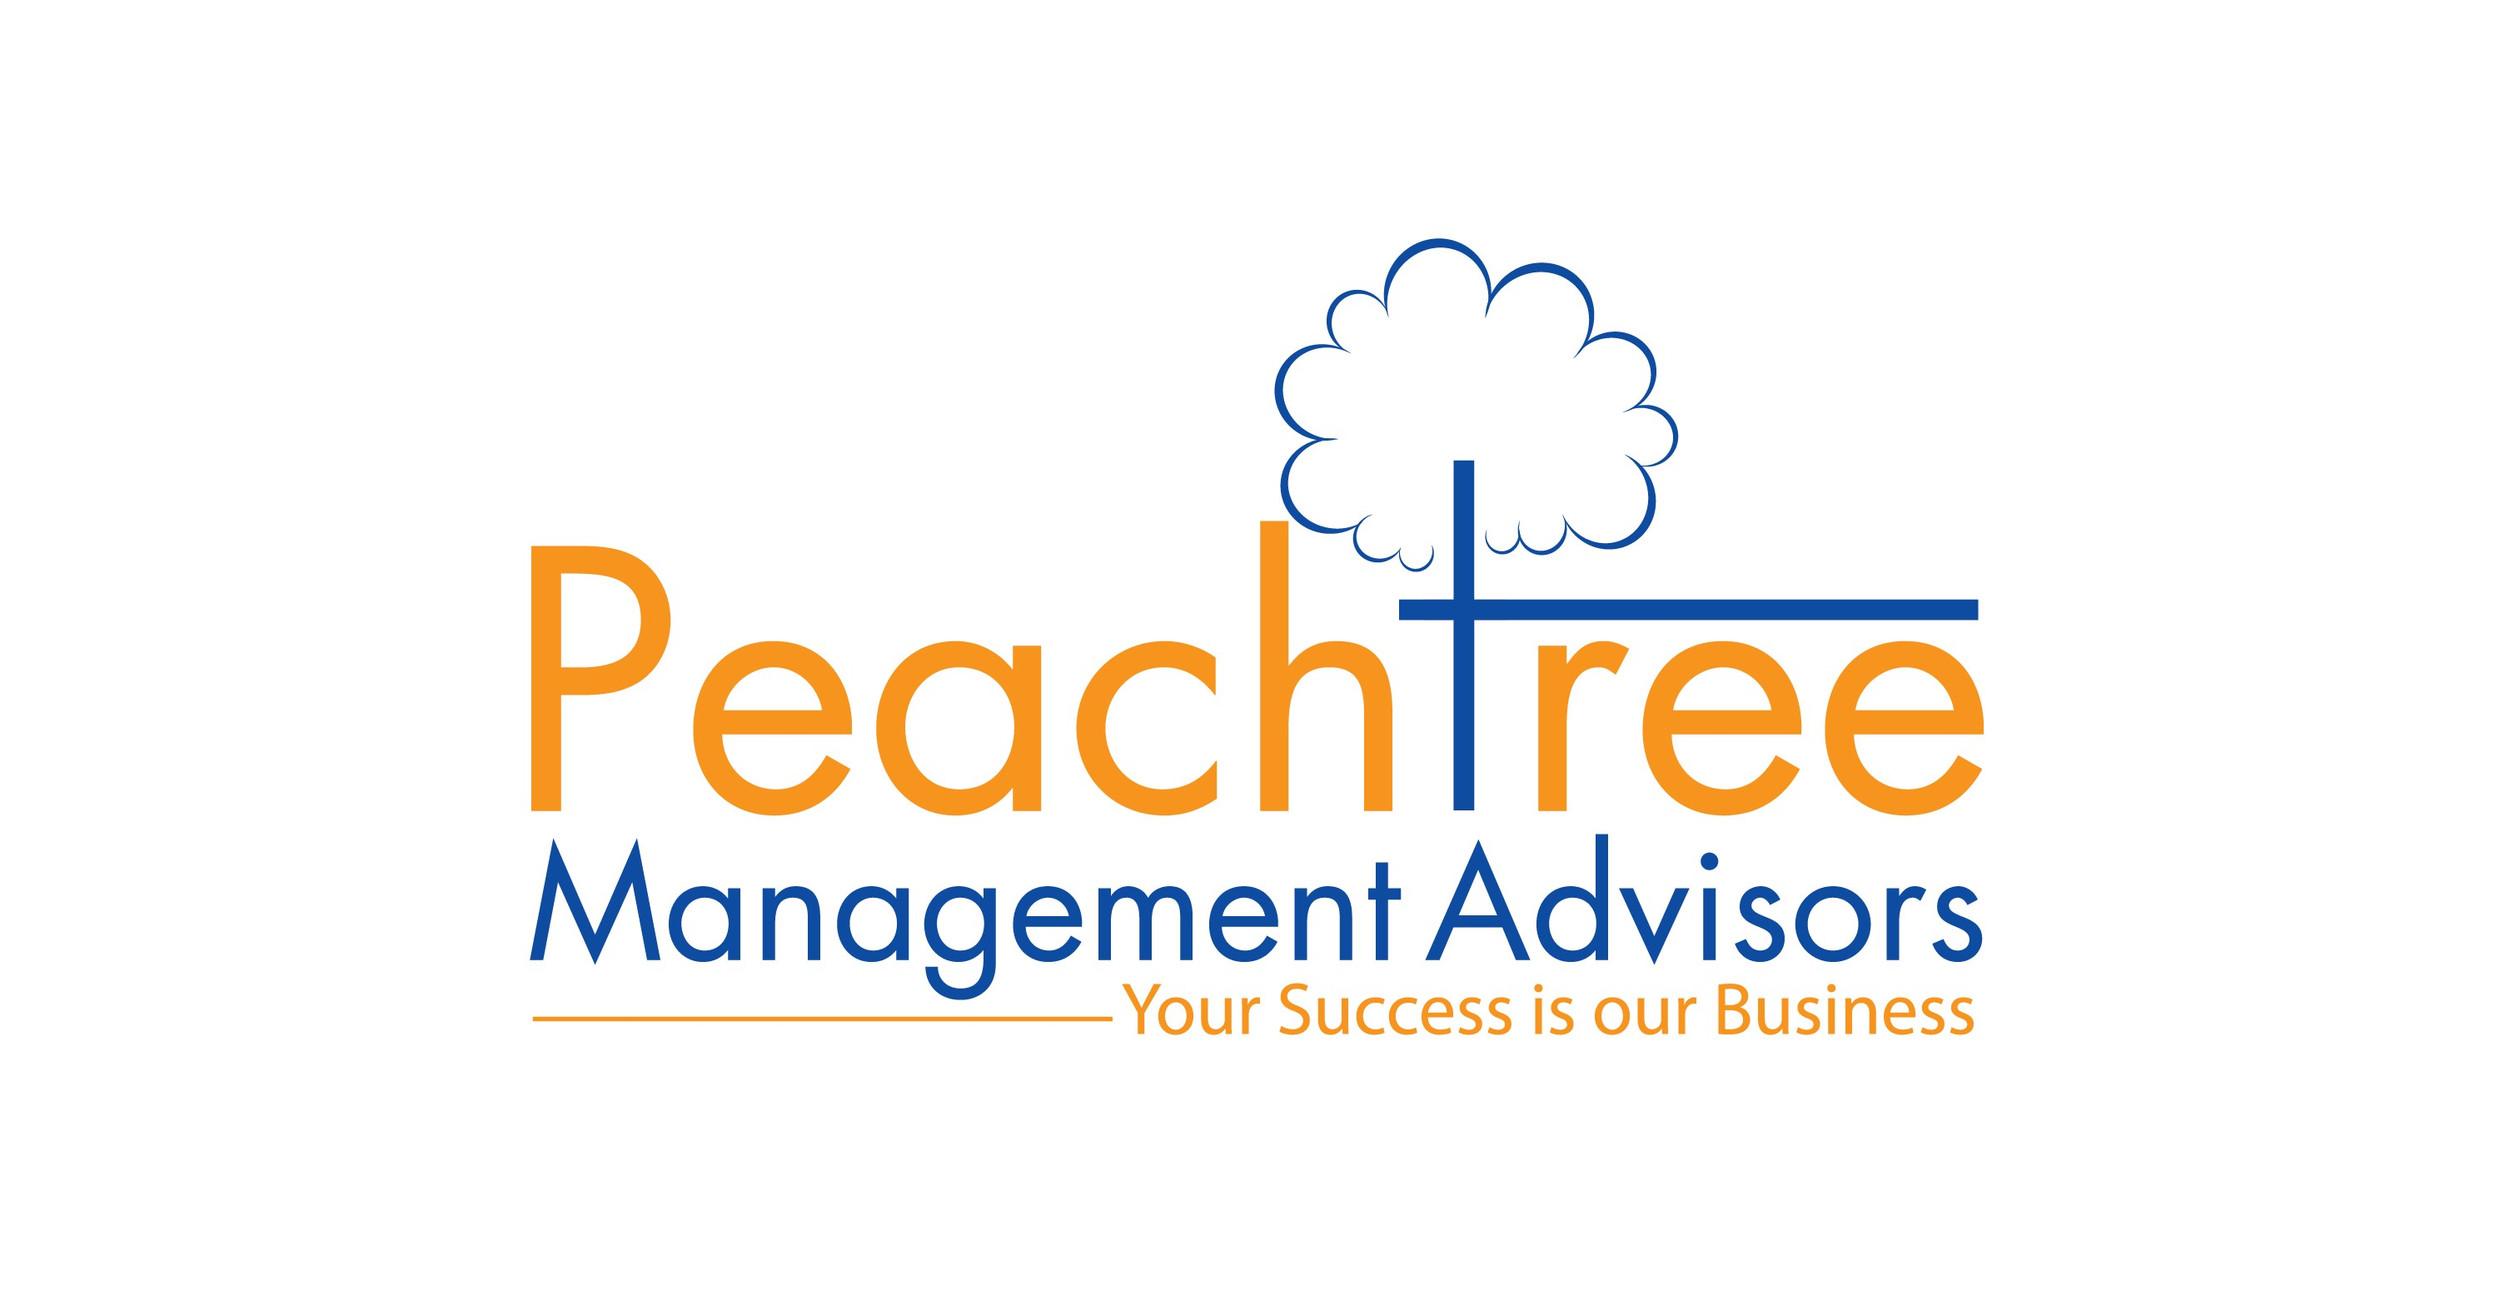 Product Services | Peachtree Management Advisors image